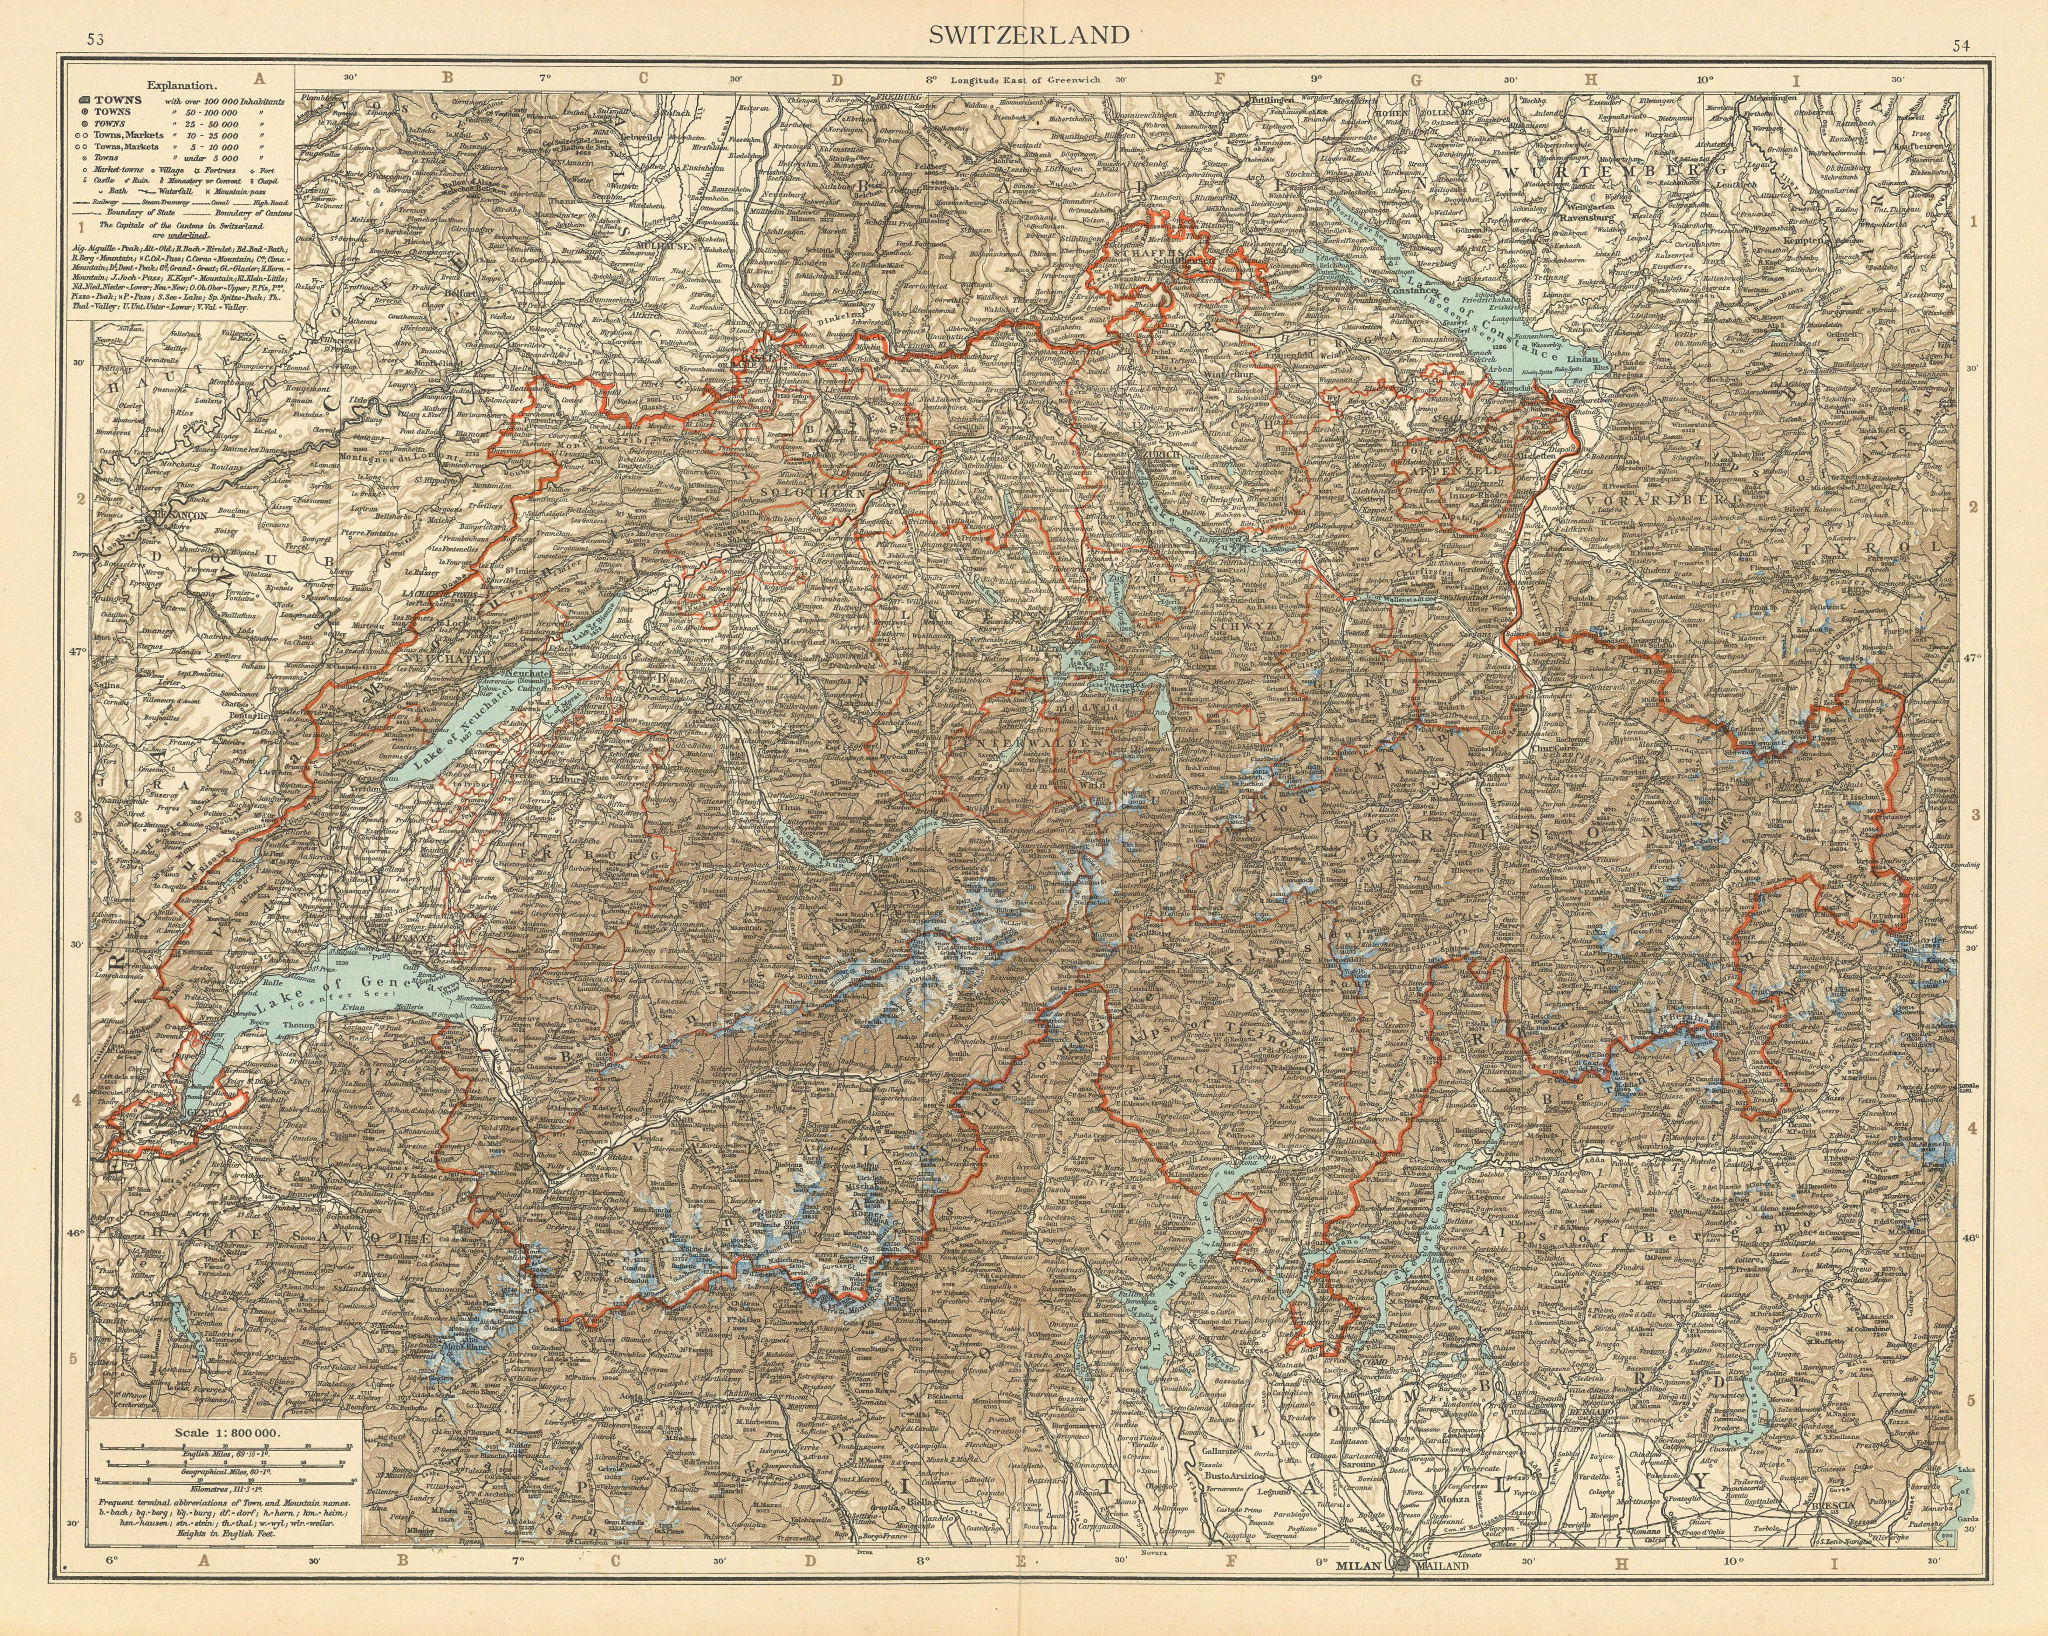 Switzerland & the Western (French, Swiss, Italian) Alps. THE TIMES 1895 map